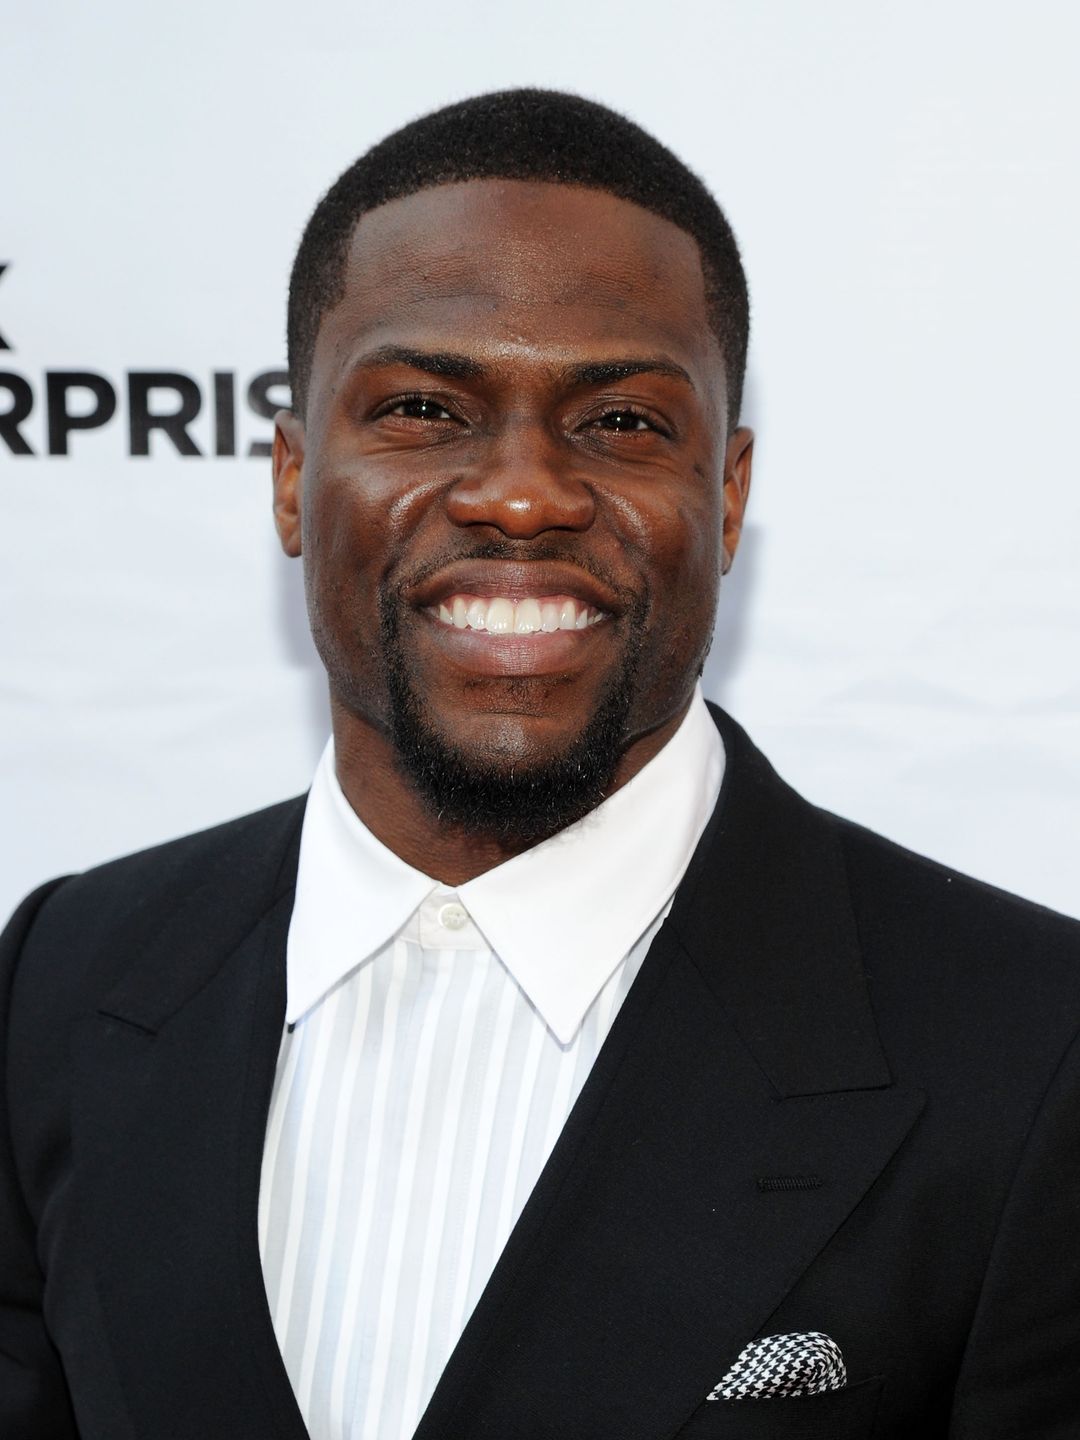 Kevin Hart early career